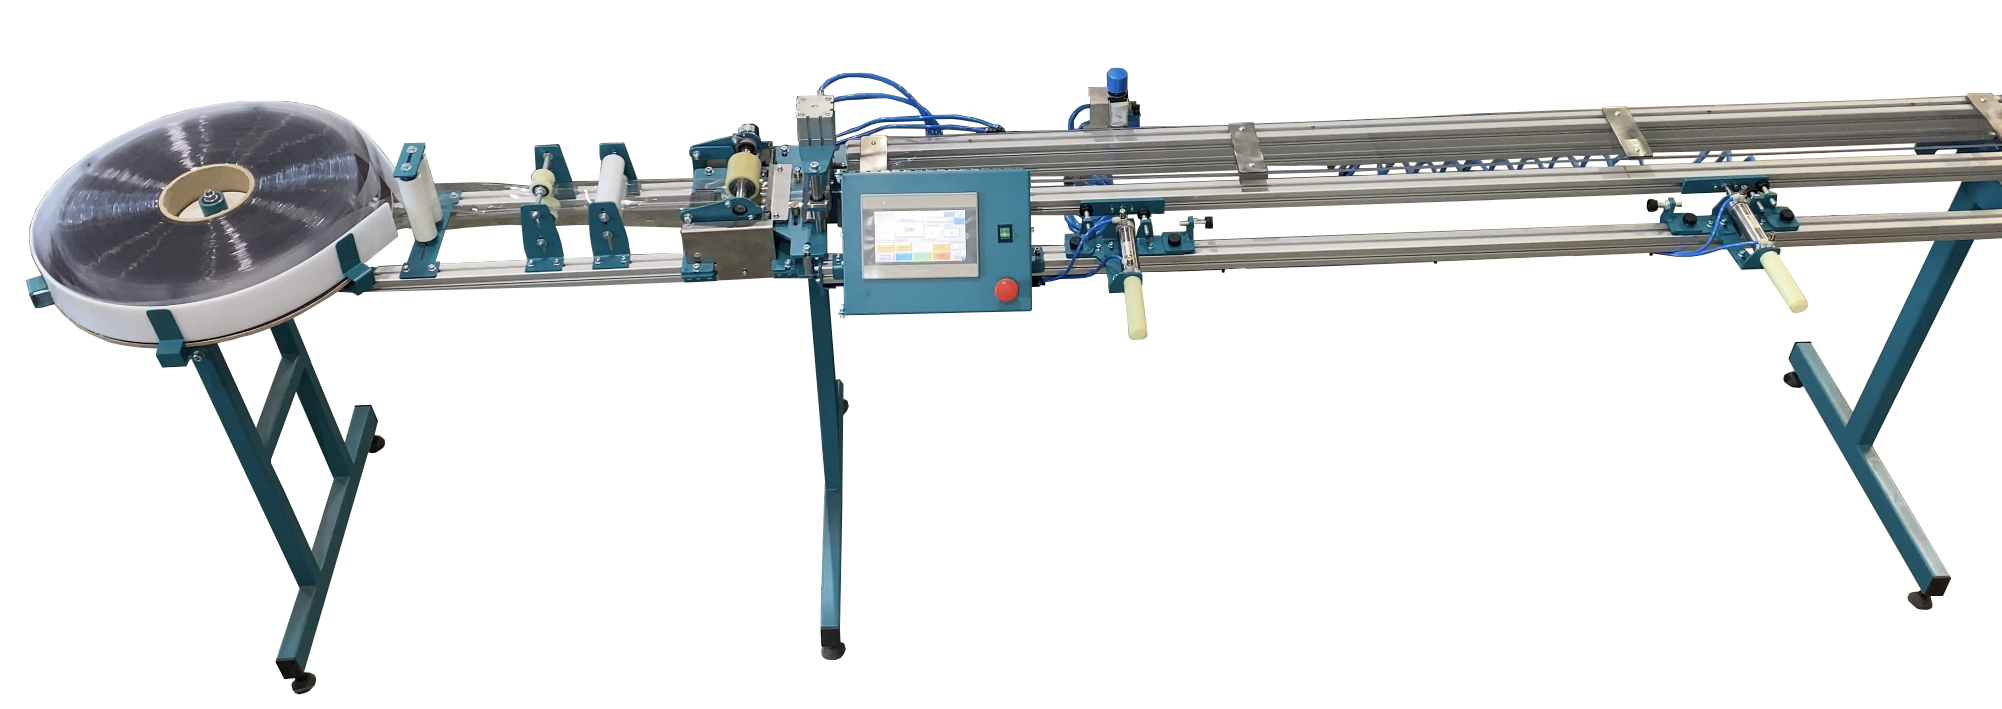 Cutting stand for plastic packaging 